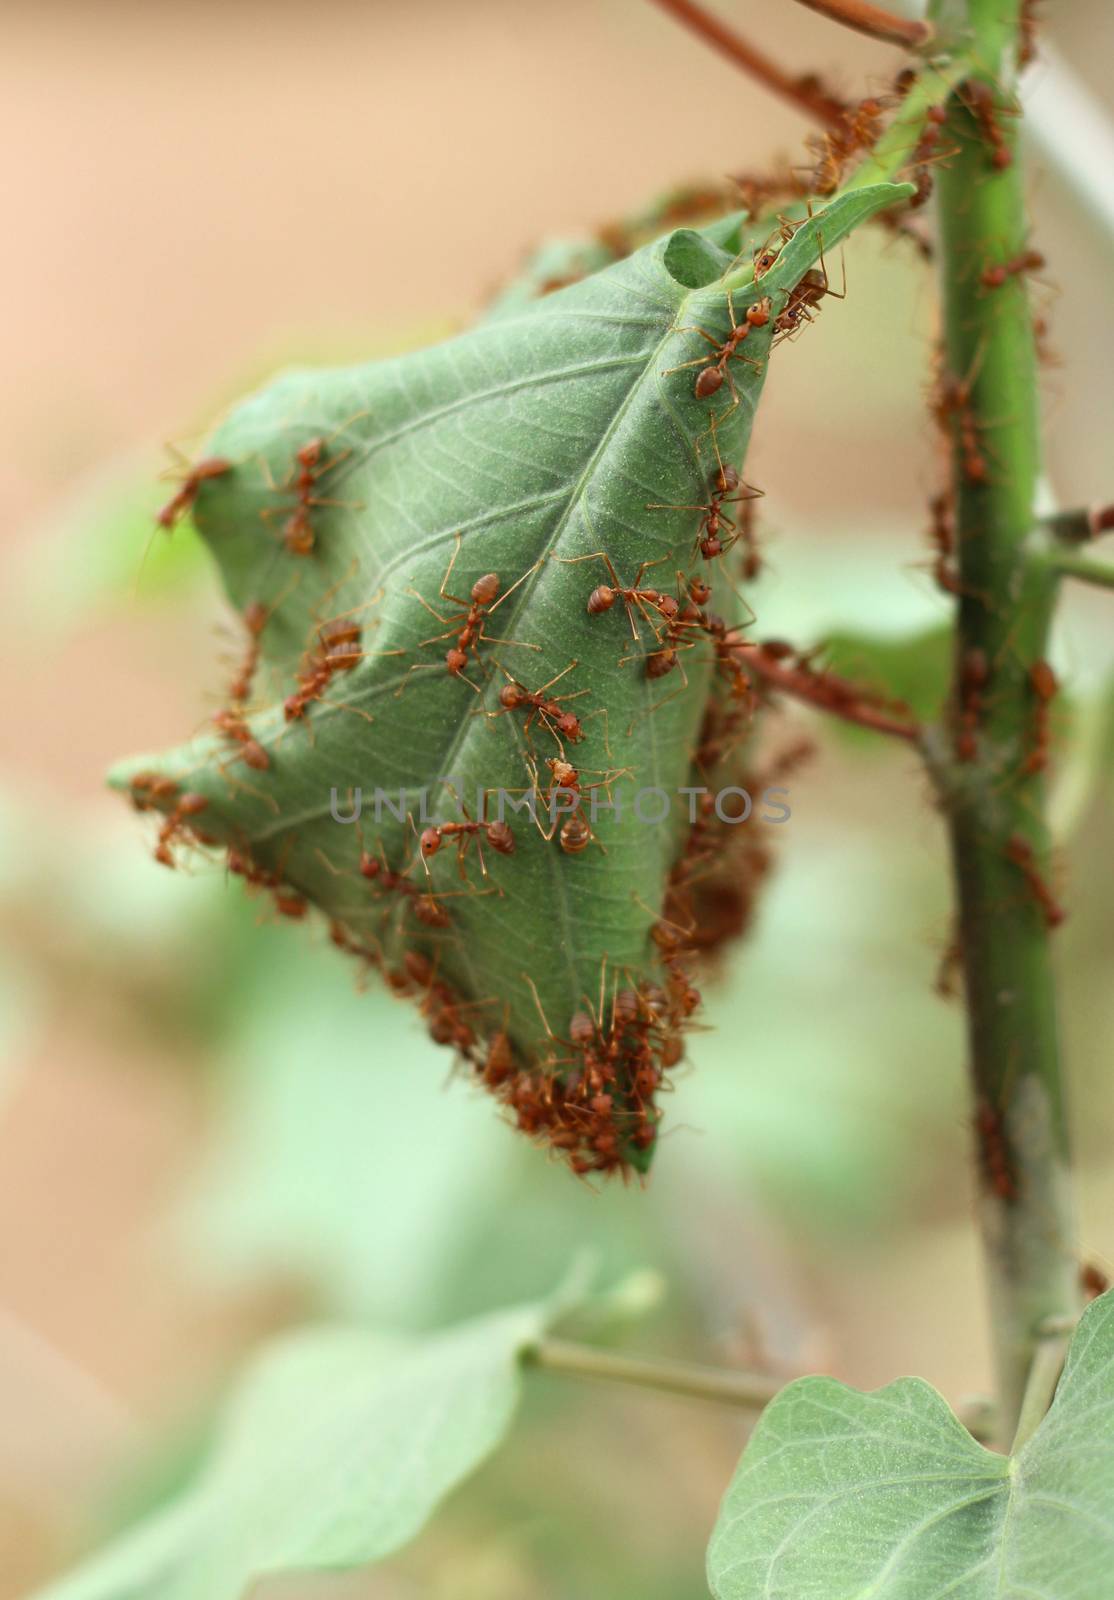 Ants' nest made by joining together green leaves of a tree